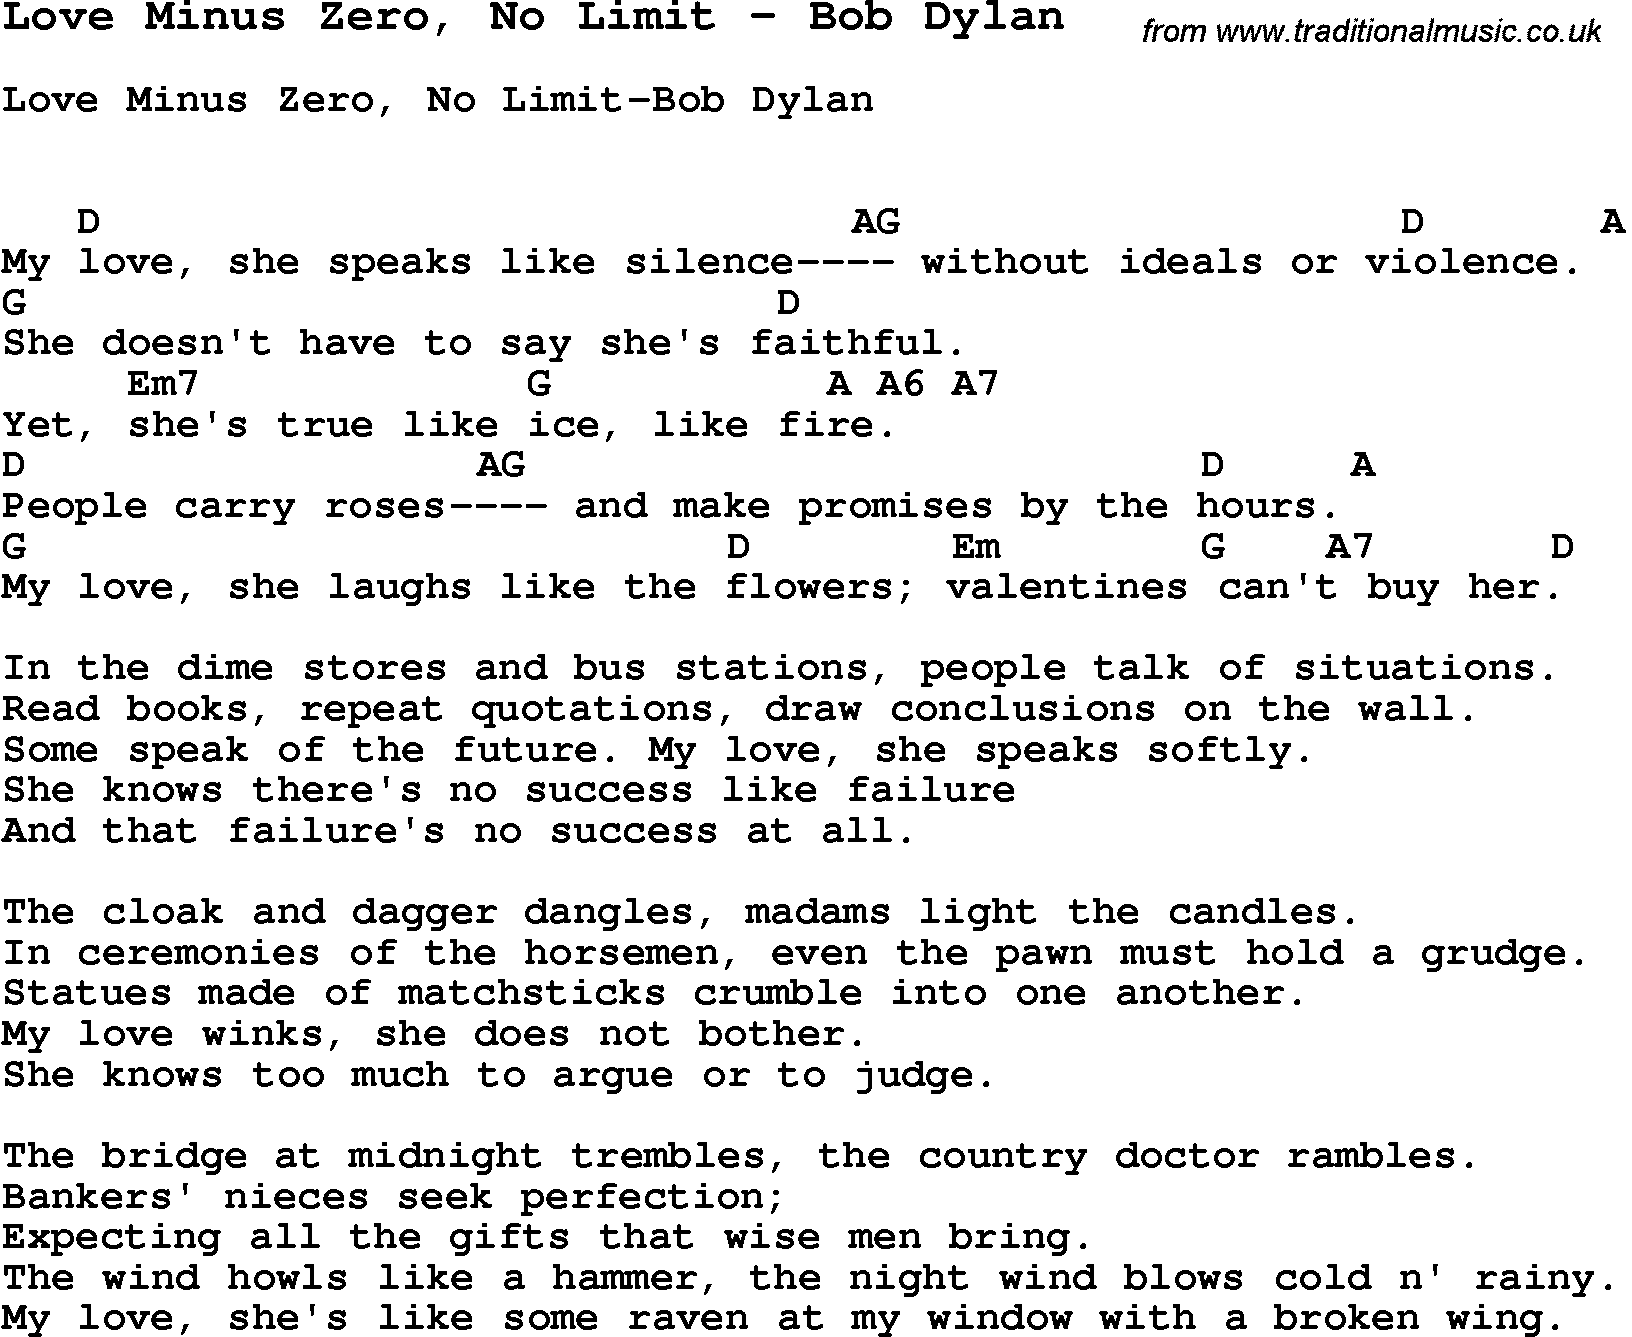 Song Love Minus Zero, No Limit by Bob Dylan, with lyrics for vocal performance and accompaniment chords for Ukulele, Guitar Banjo etc.